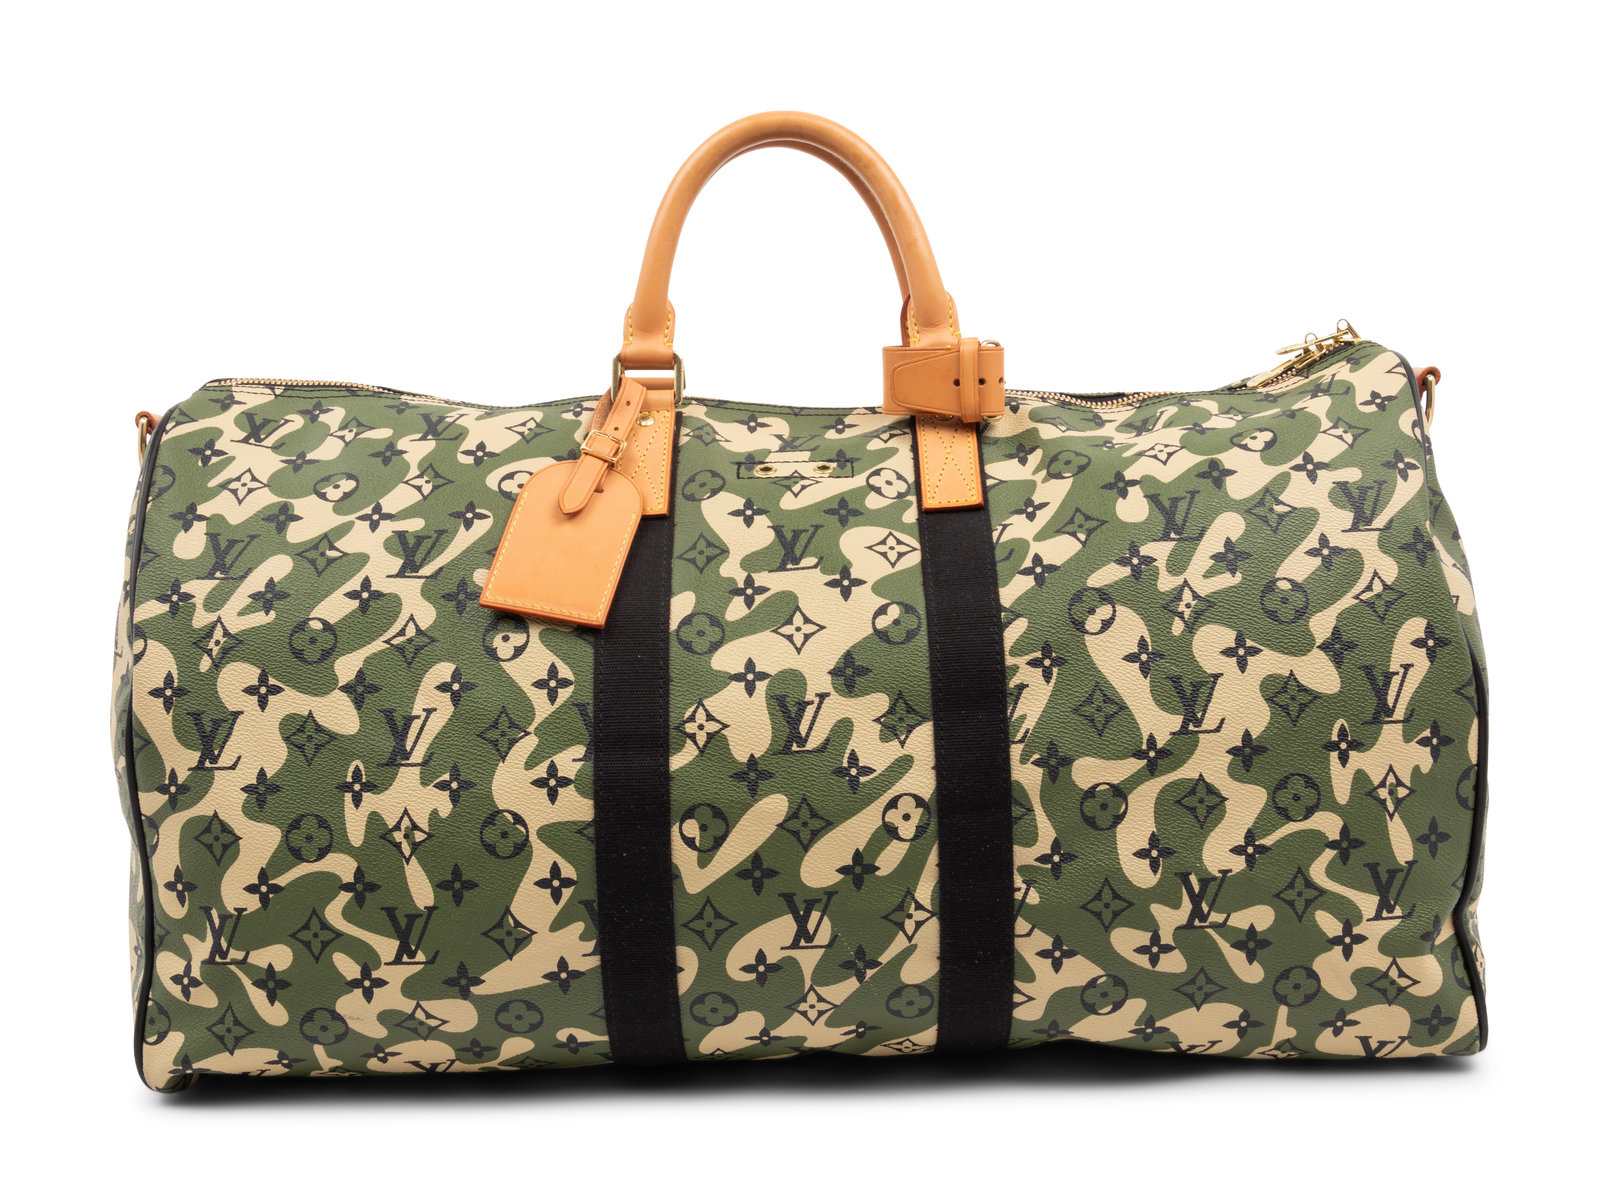 Louis Vuitton Limited Edition Keepall Bandoulière 55 in